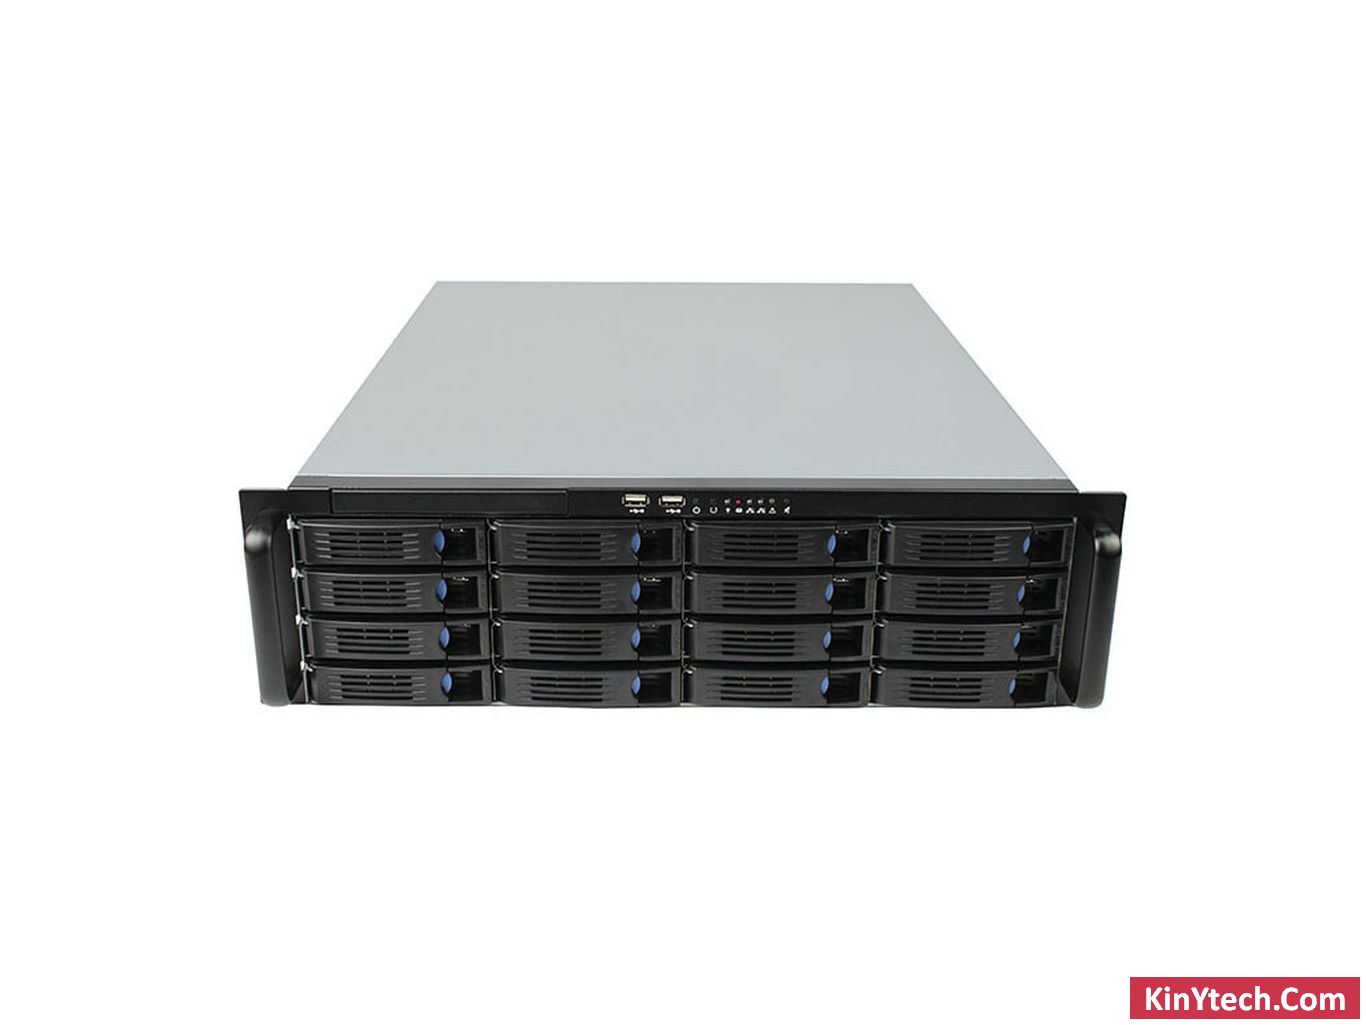 chassis voor opslagserver